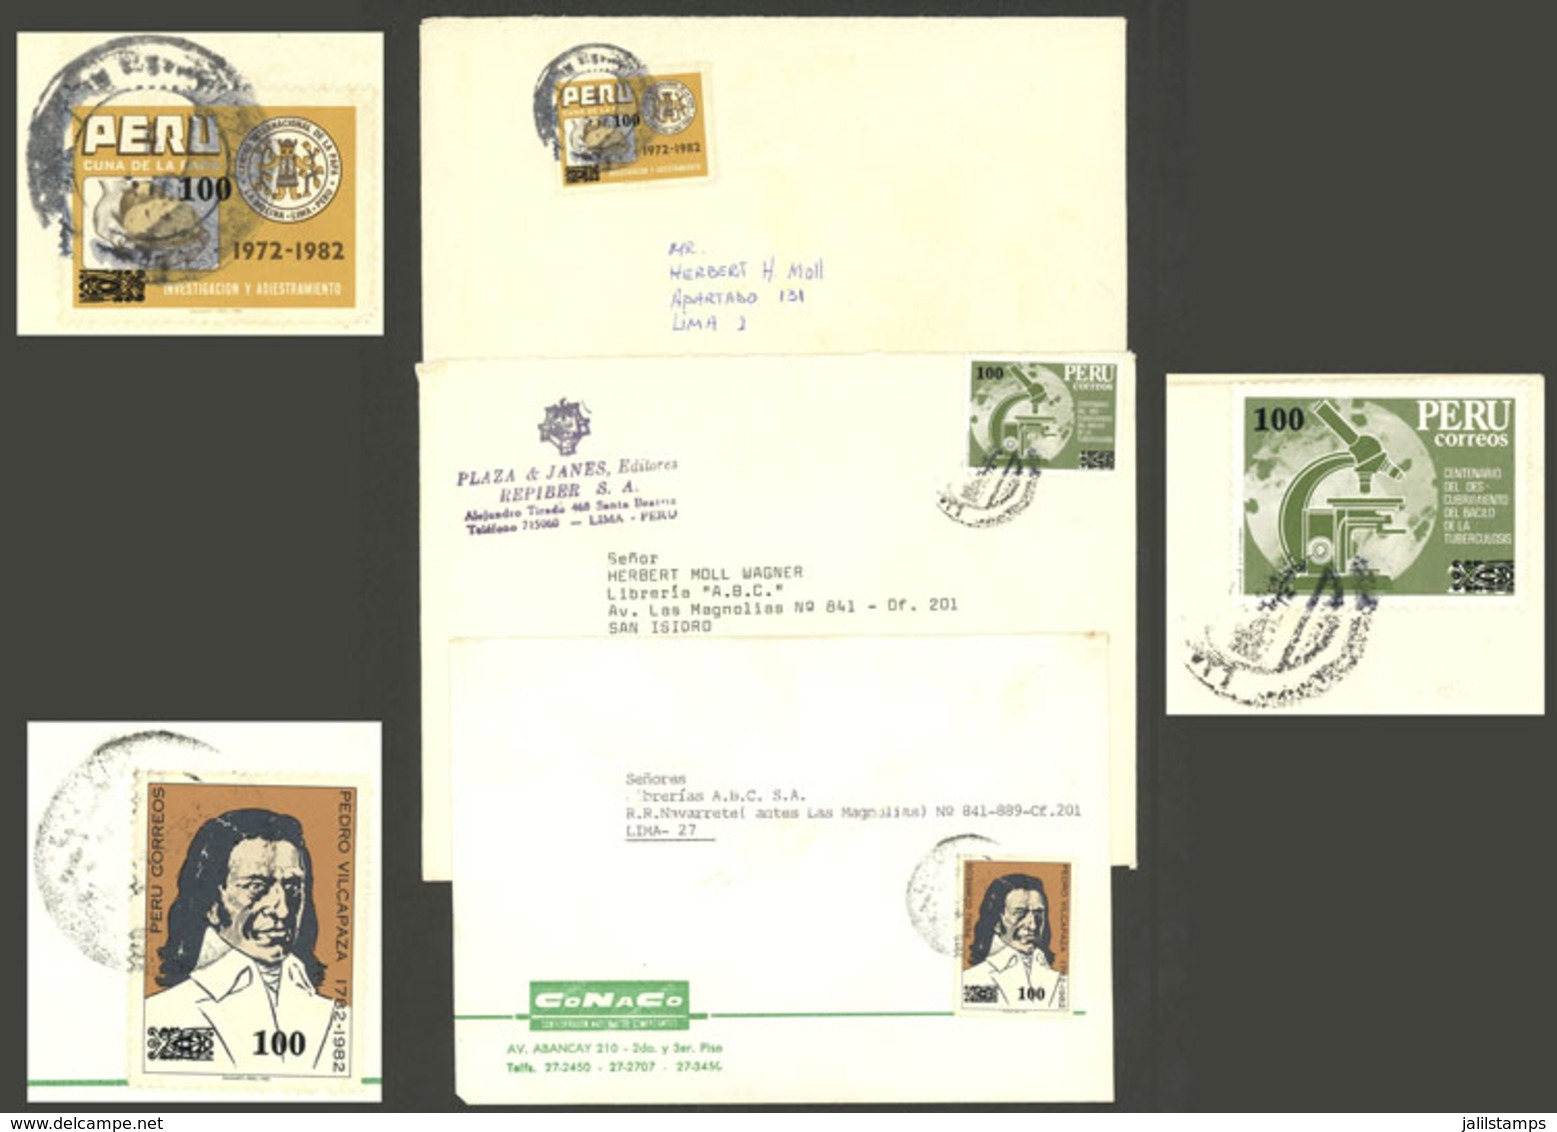 PERU: 3 Modern Used Covers, Franked With SURCHARGED Stamps, Interesting! - Peru